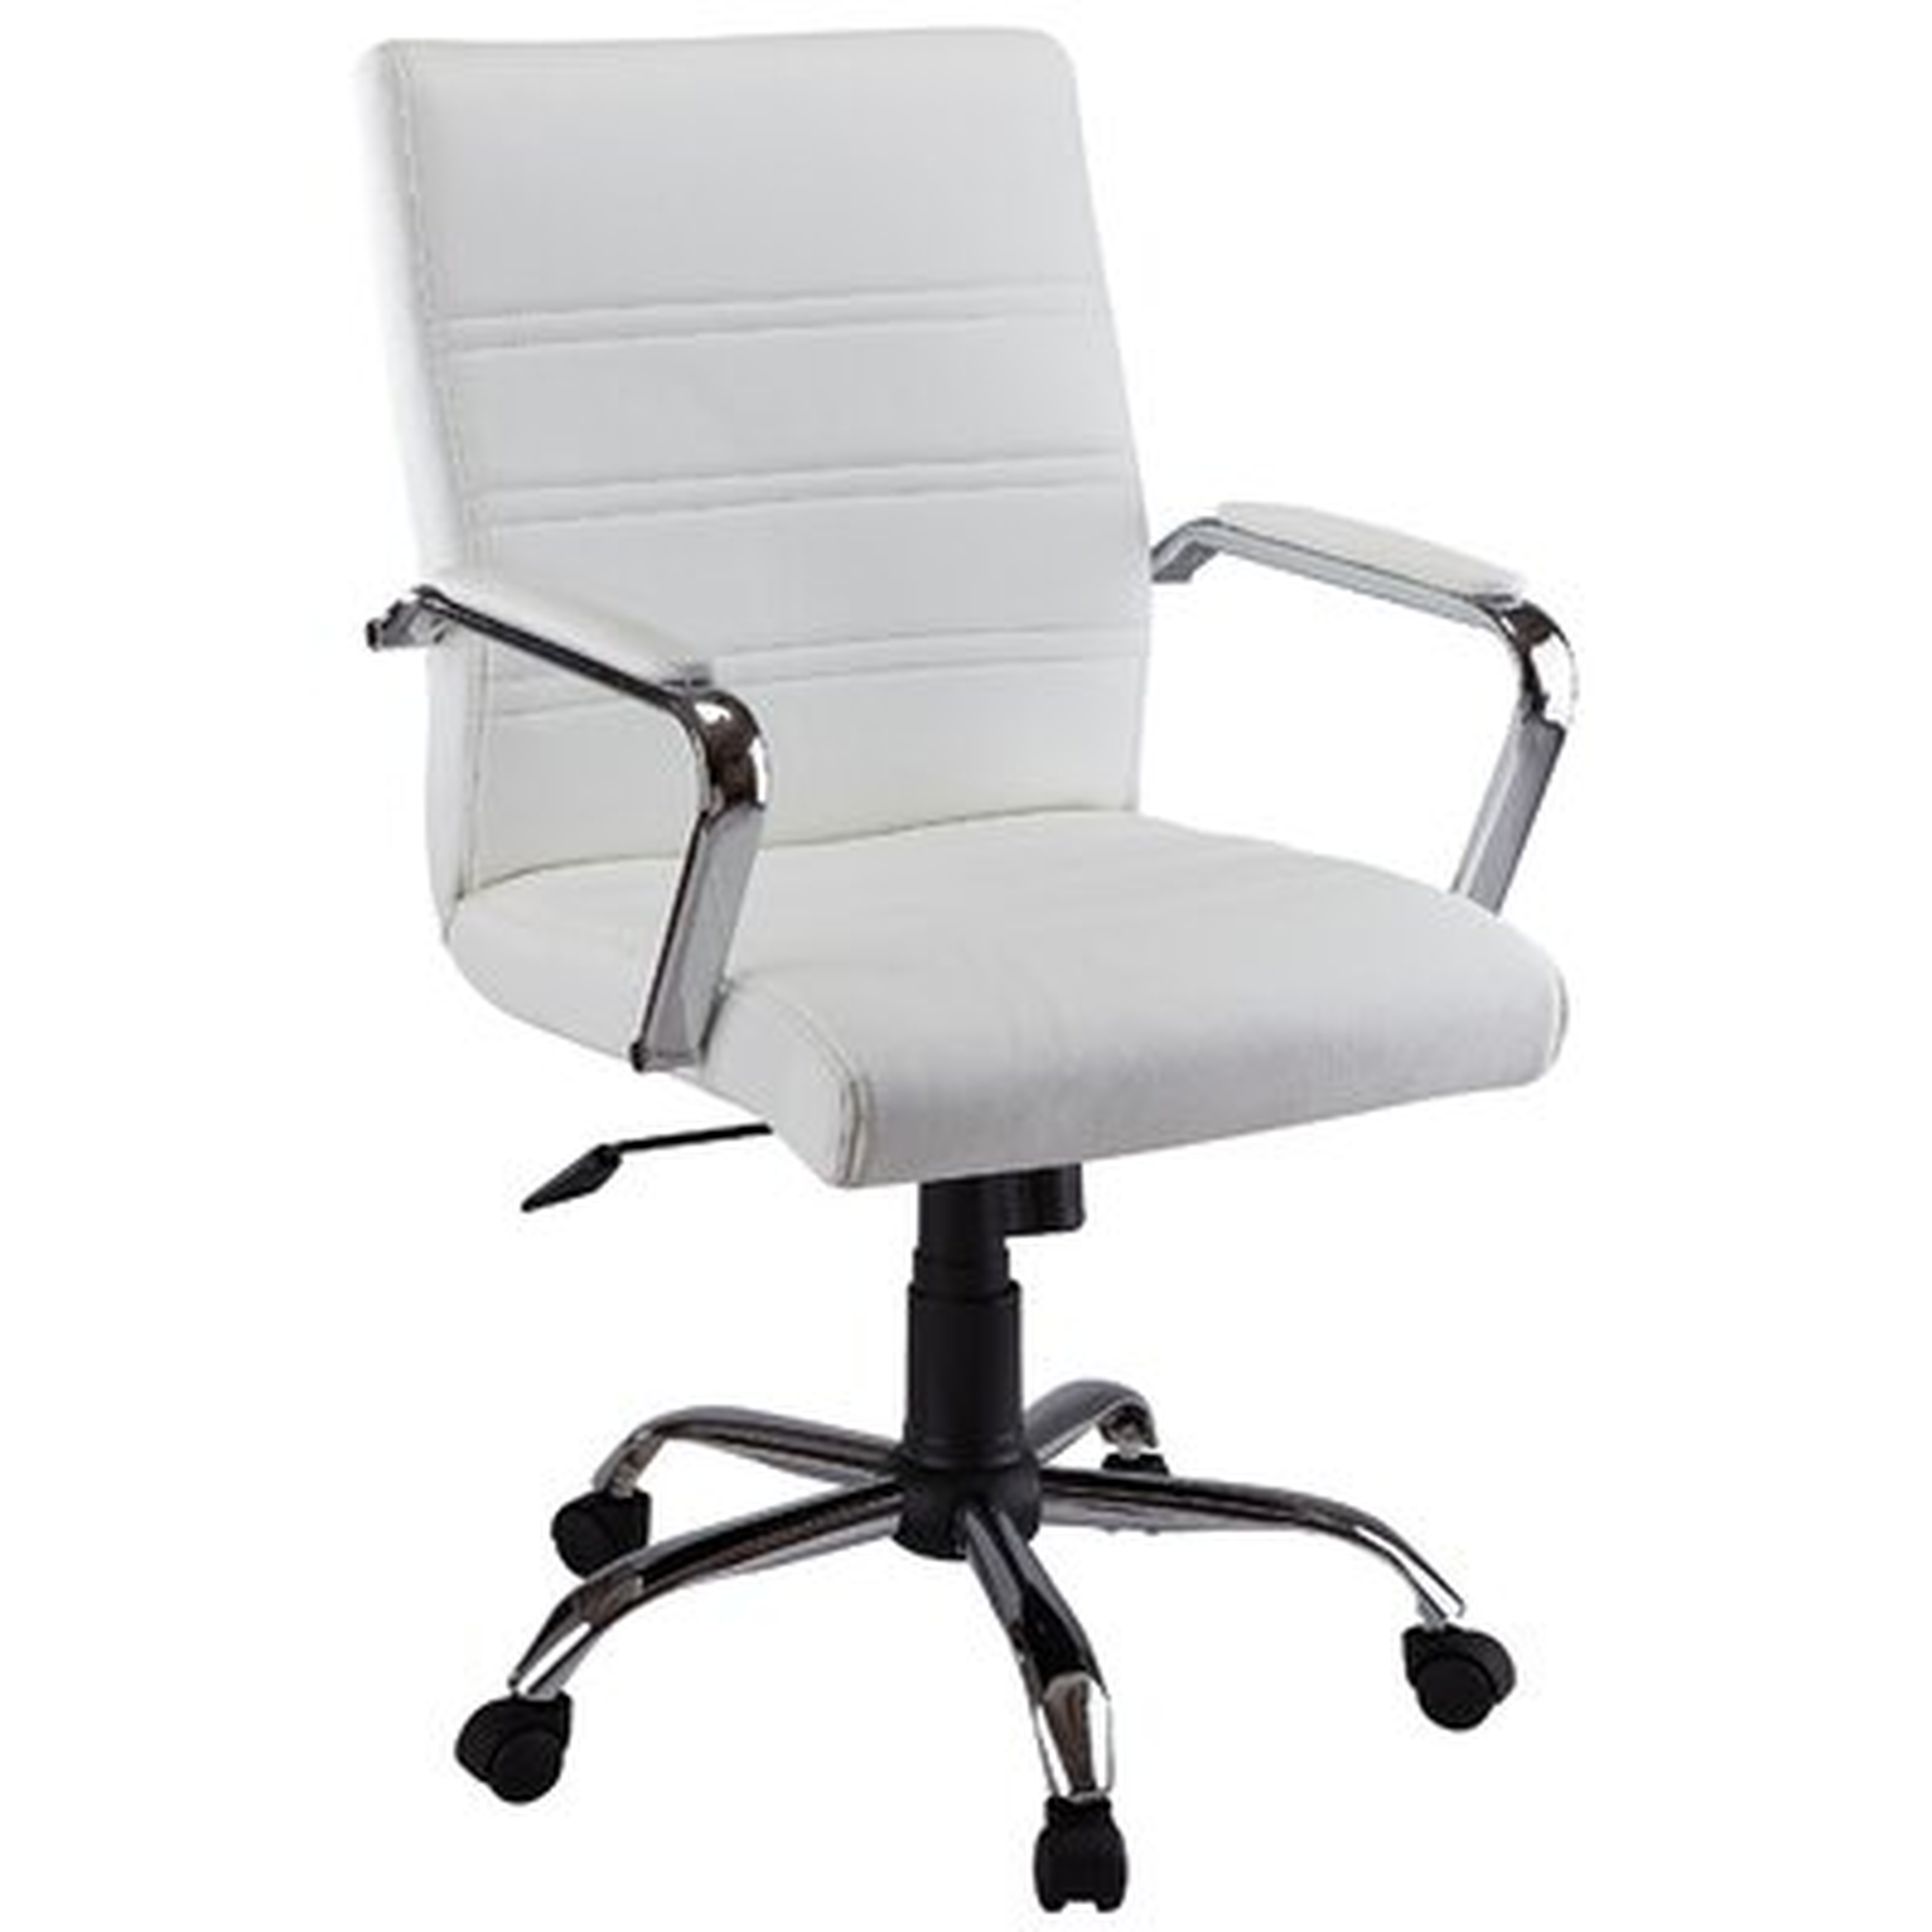 `Ergonomic Office Chairs For Home Or Office Use, White - Wayfair